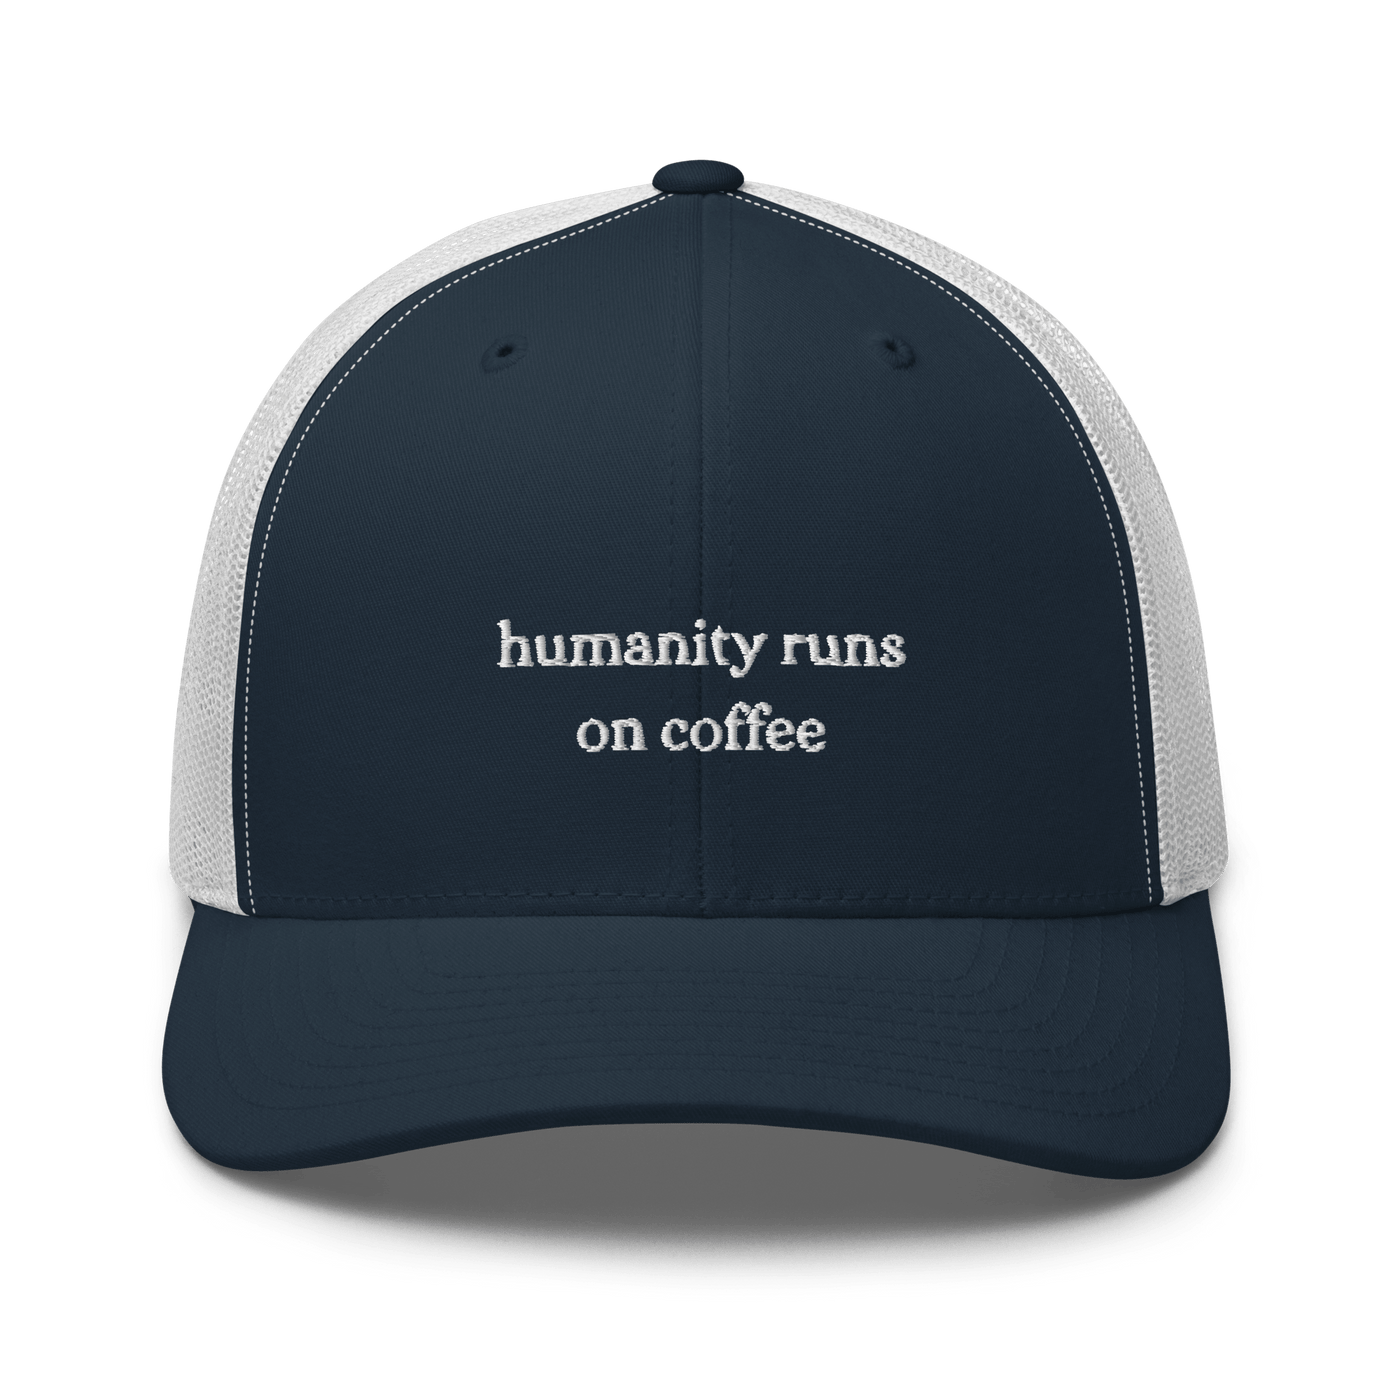 Humanity Runs on Coffee Trucker Cap - Navy/ White - - Just Another Cap Store